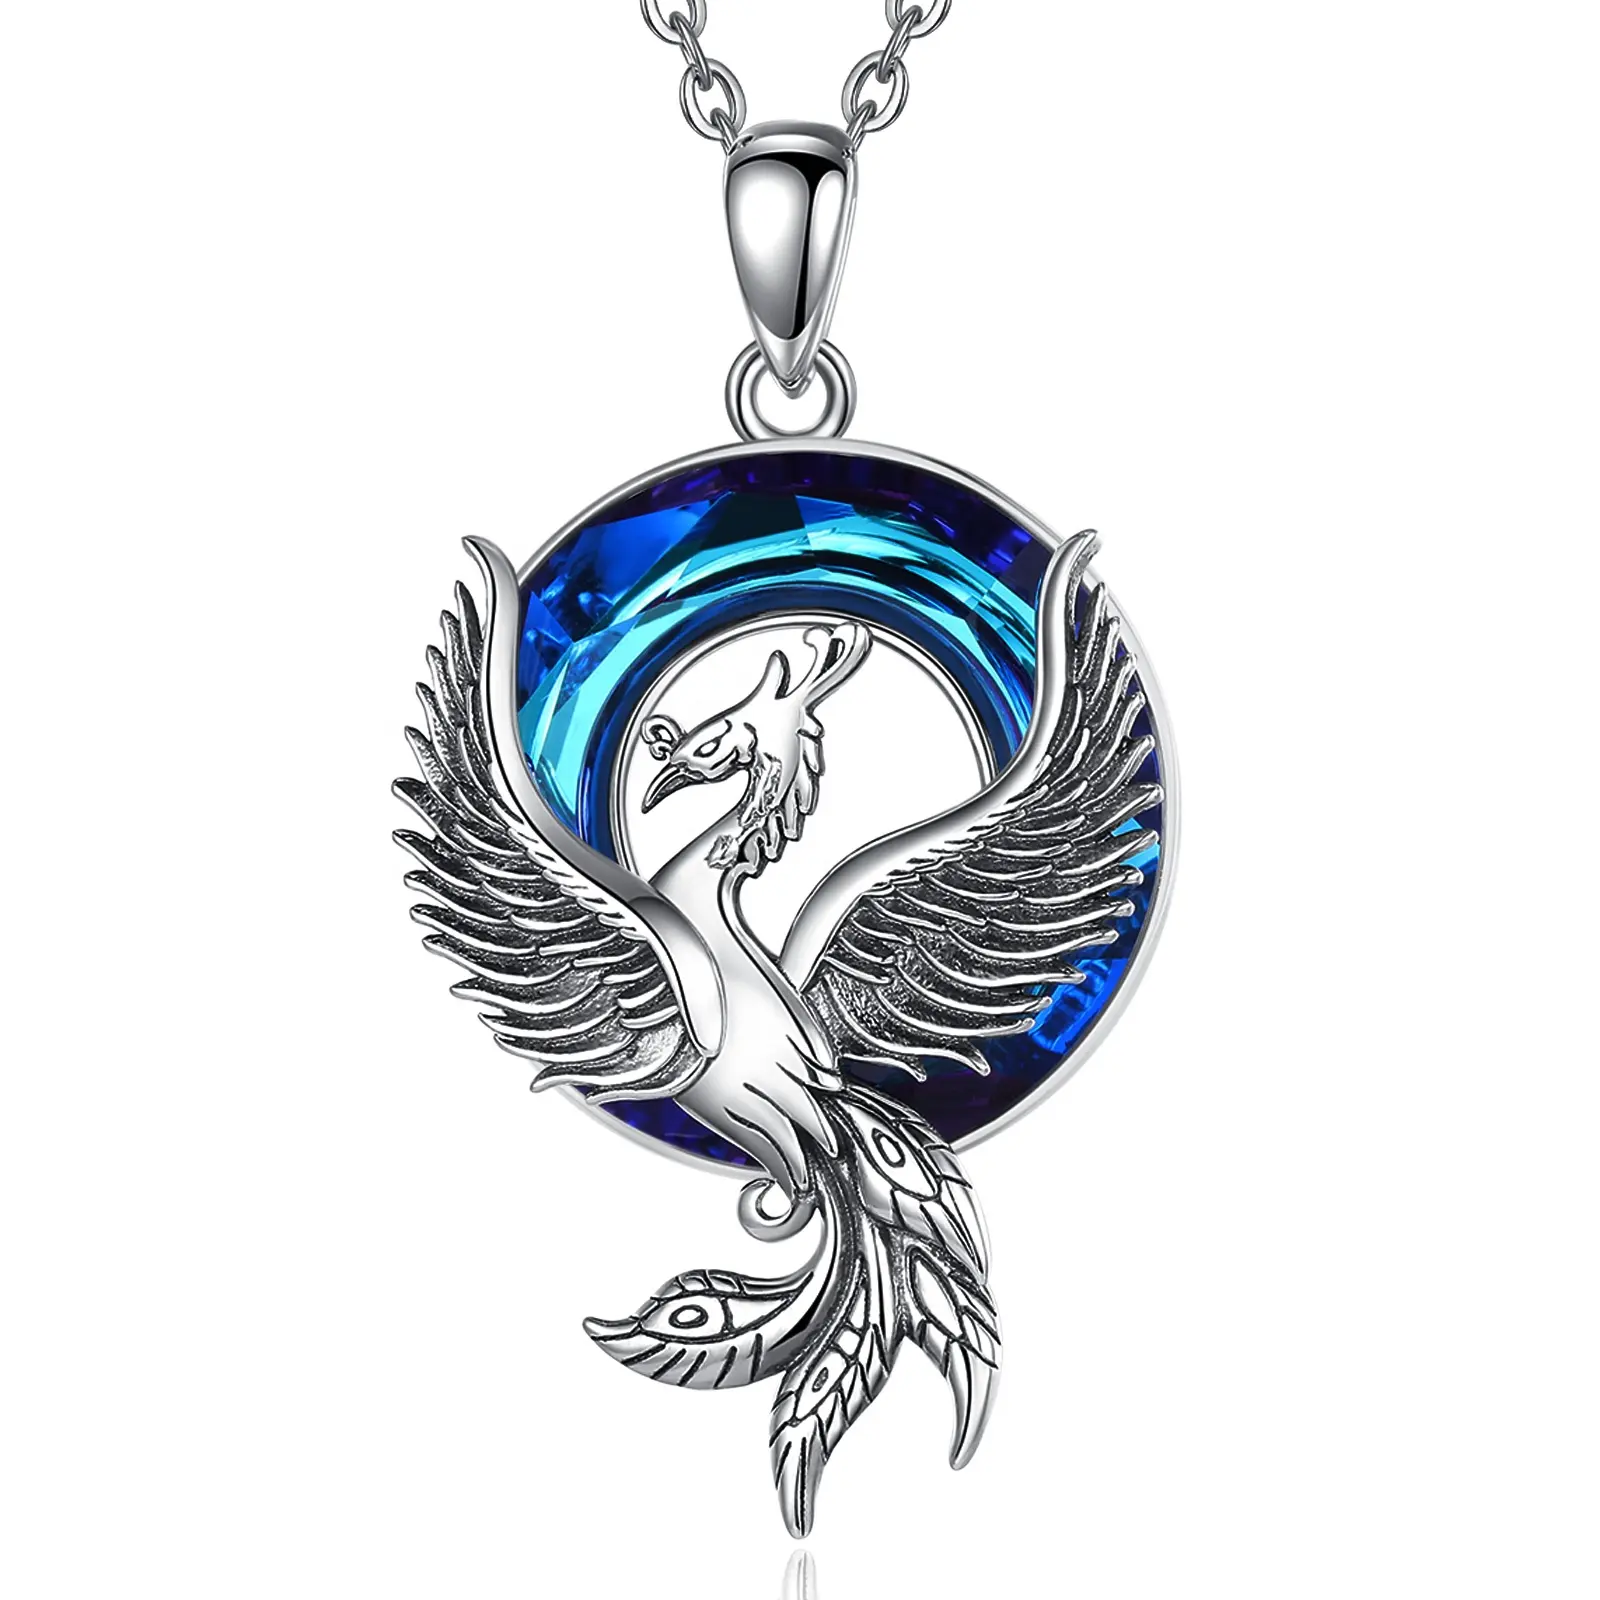 Vintage Jewelry 925 Sterling Silver Circle Shaped Blue Crystal Phoenix Element Pendant Necklace for Men